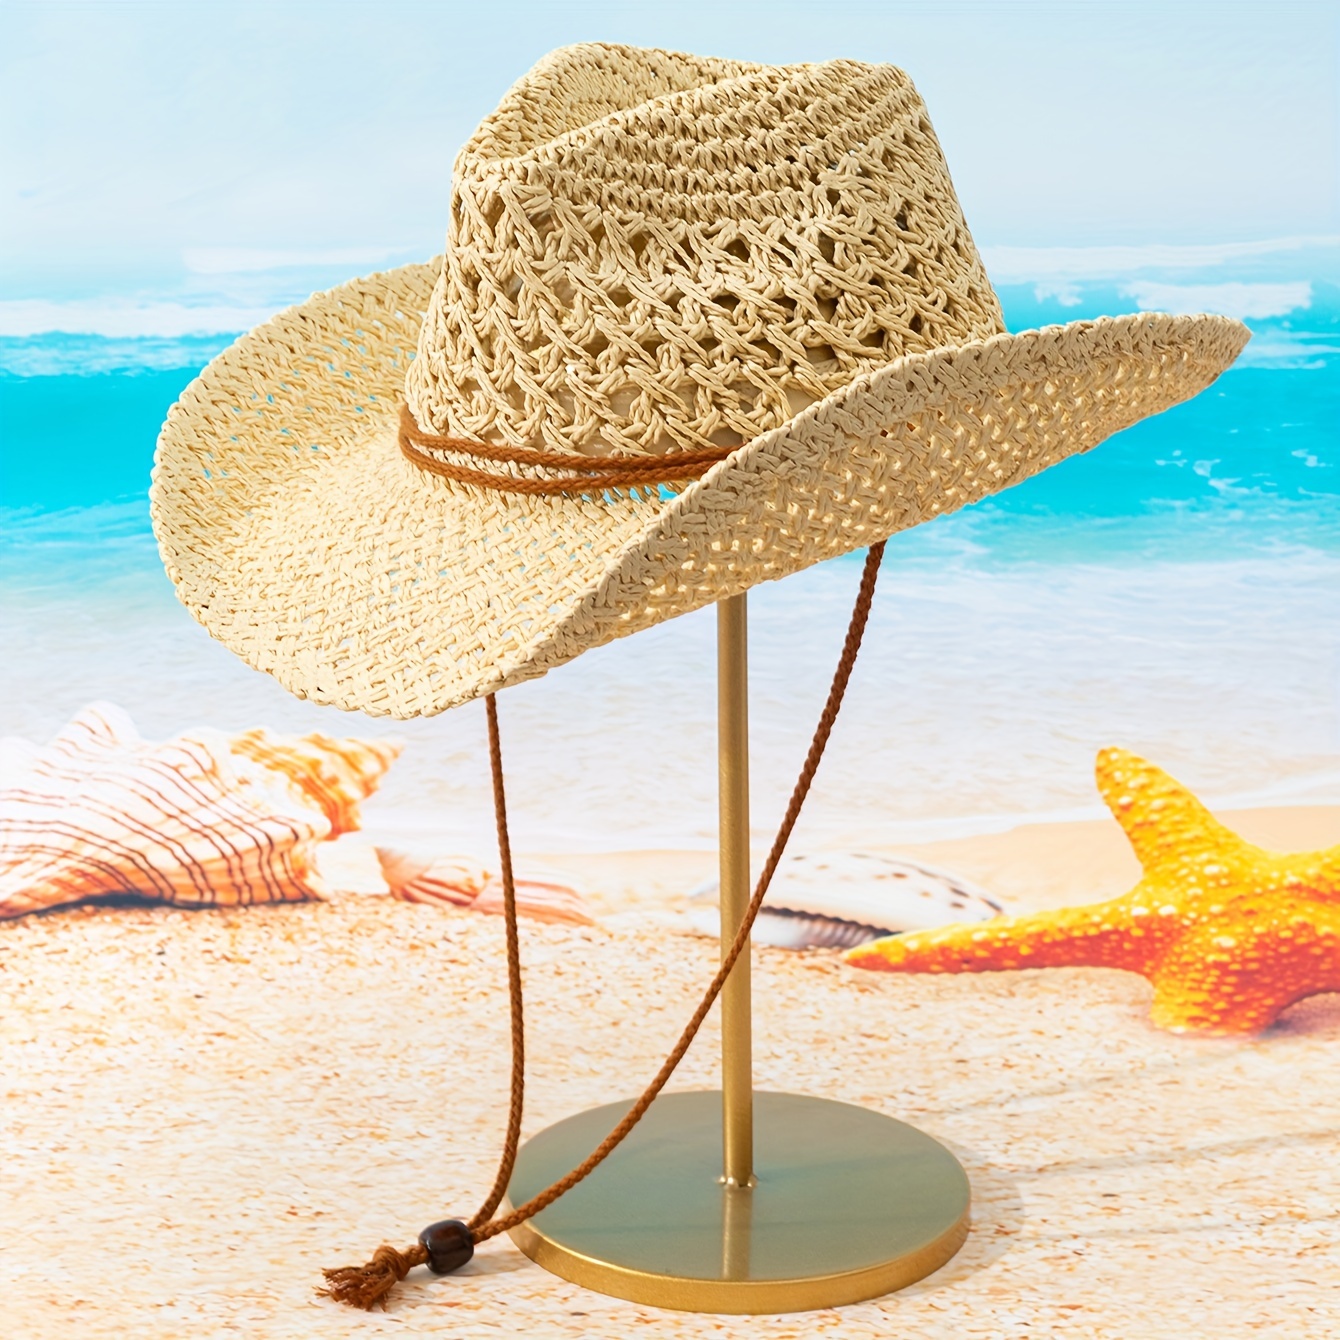 

Unisex Cowboy Style Hollow Out Straw Hat, Breathable Sun Protection Beach Hat, Ideal For Spring/summer Travel